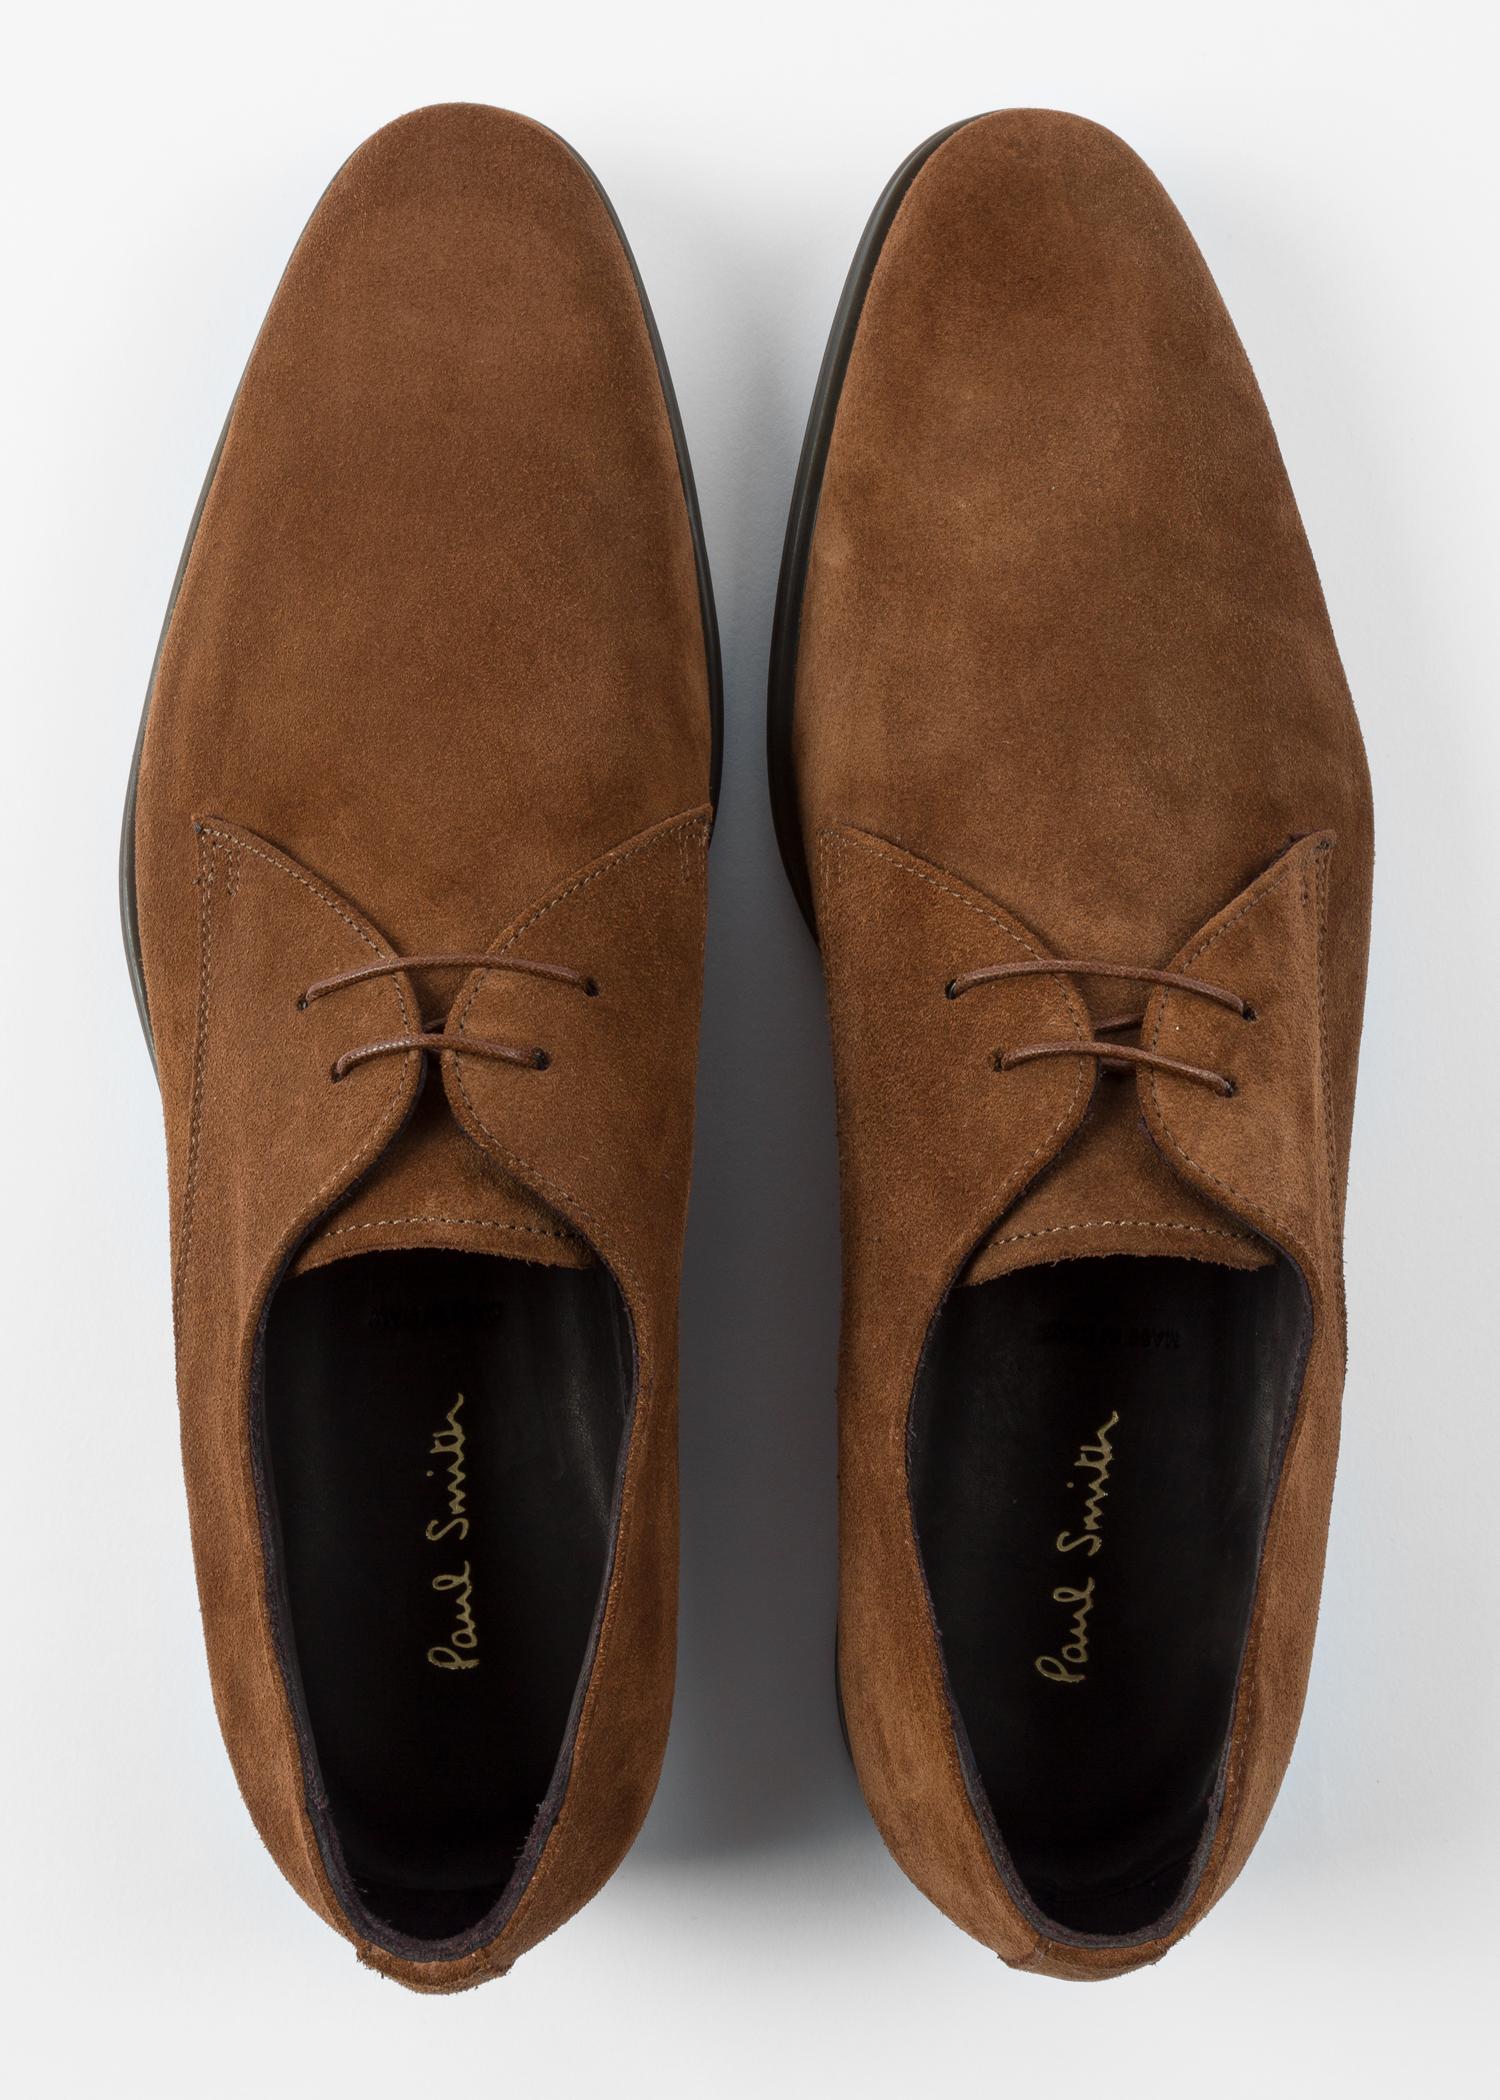 paul smith brown suede shoes